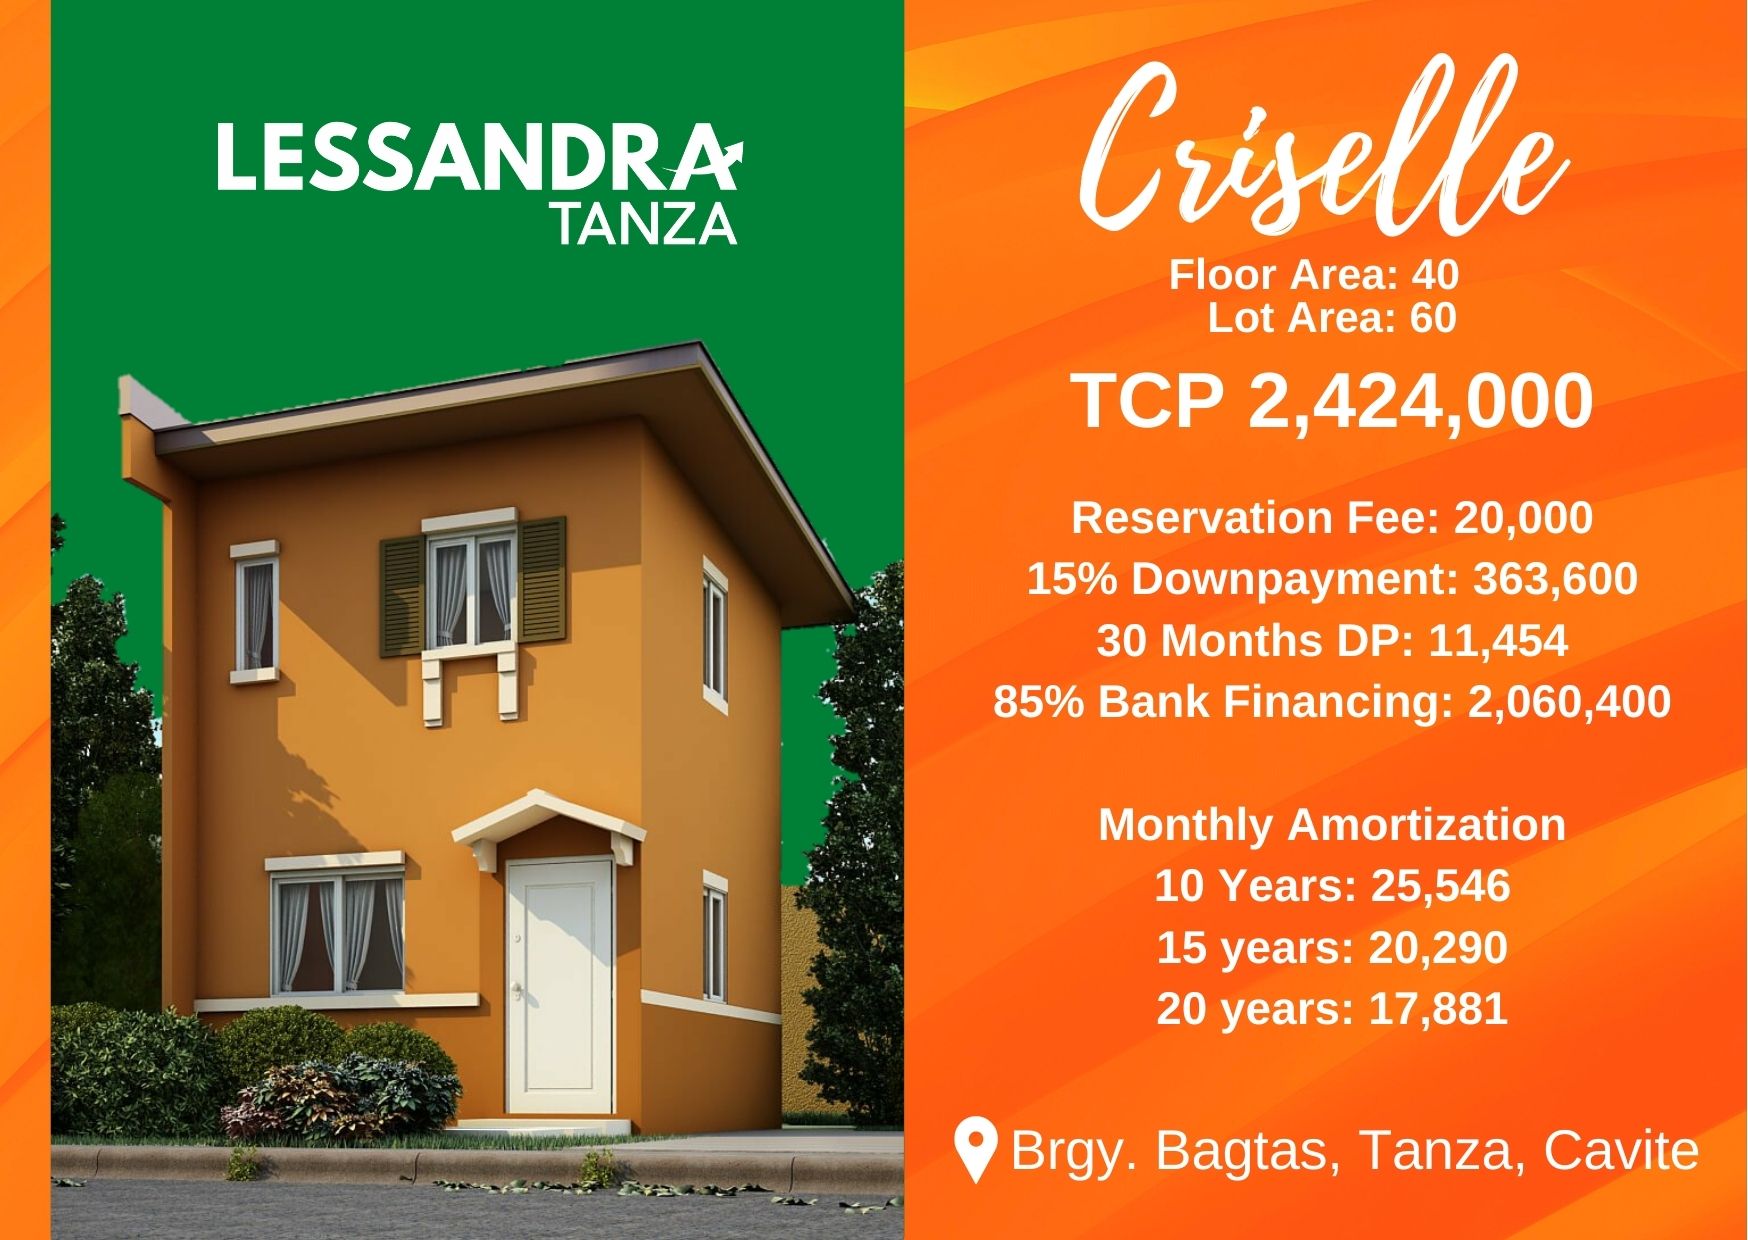 Affordable House and Lot in Tanza Arielle Criselle